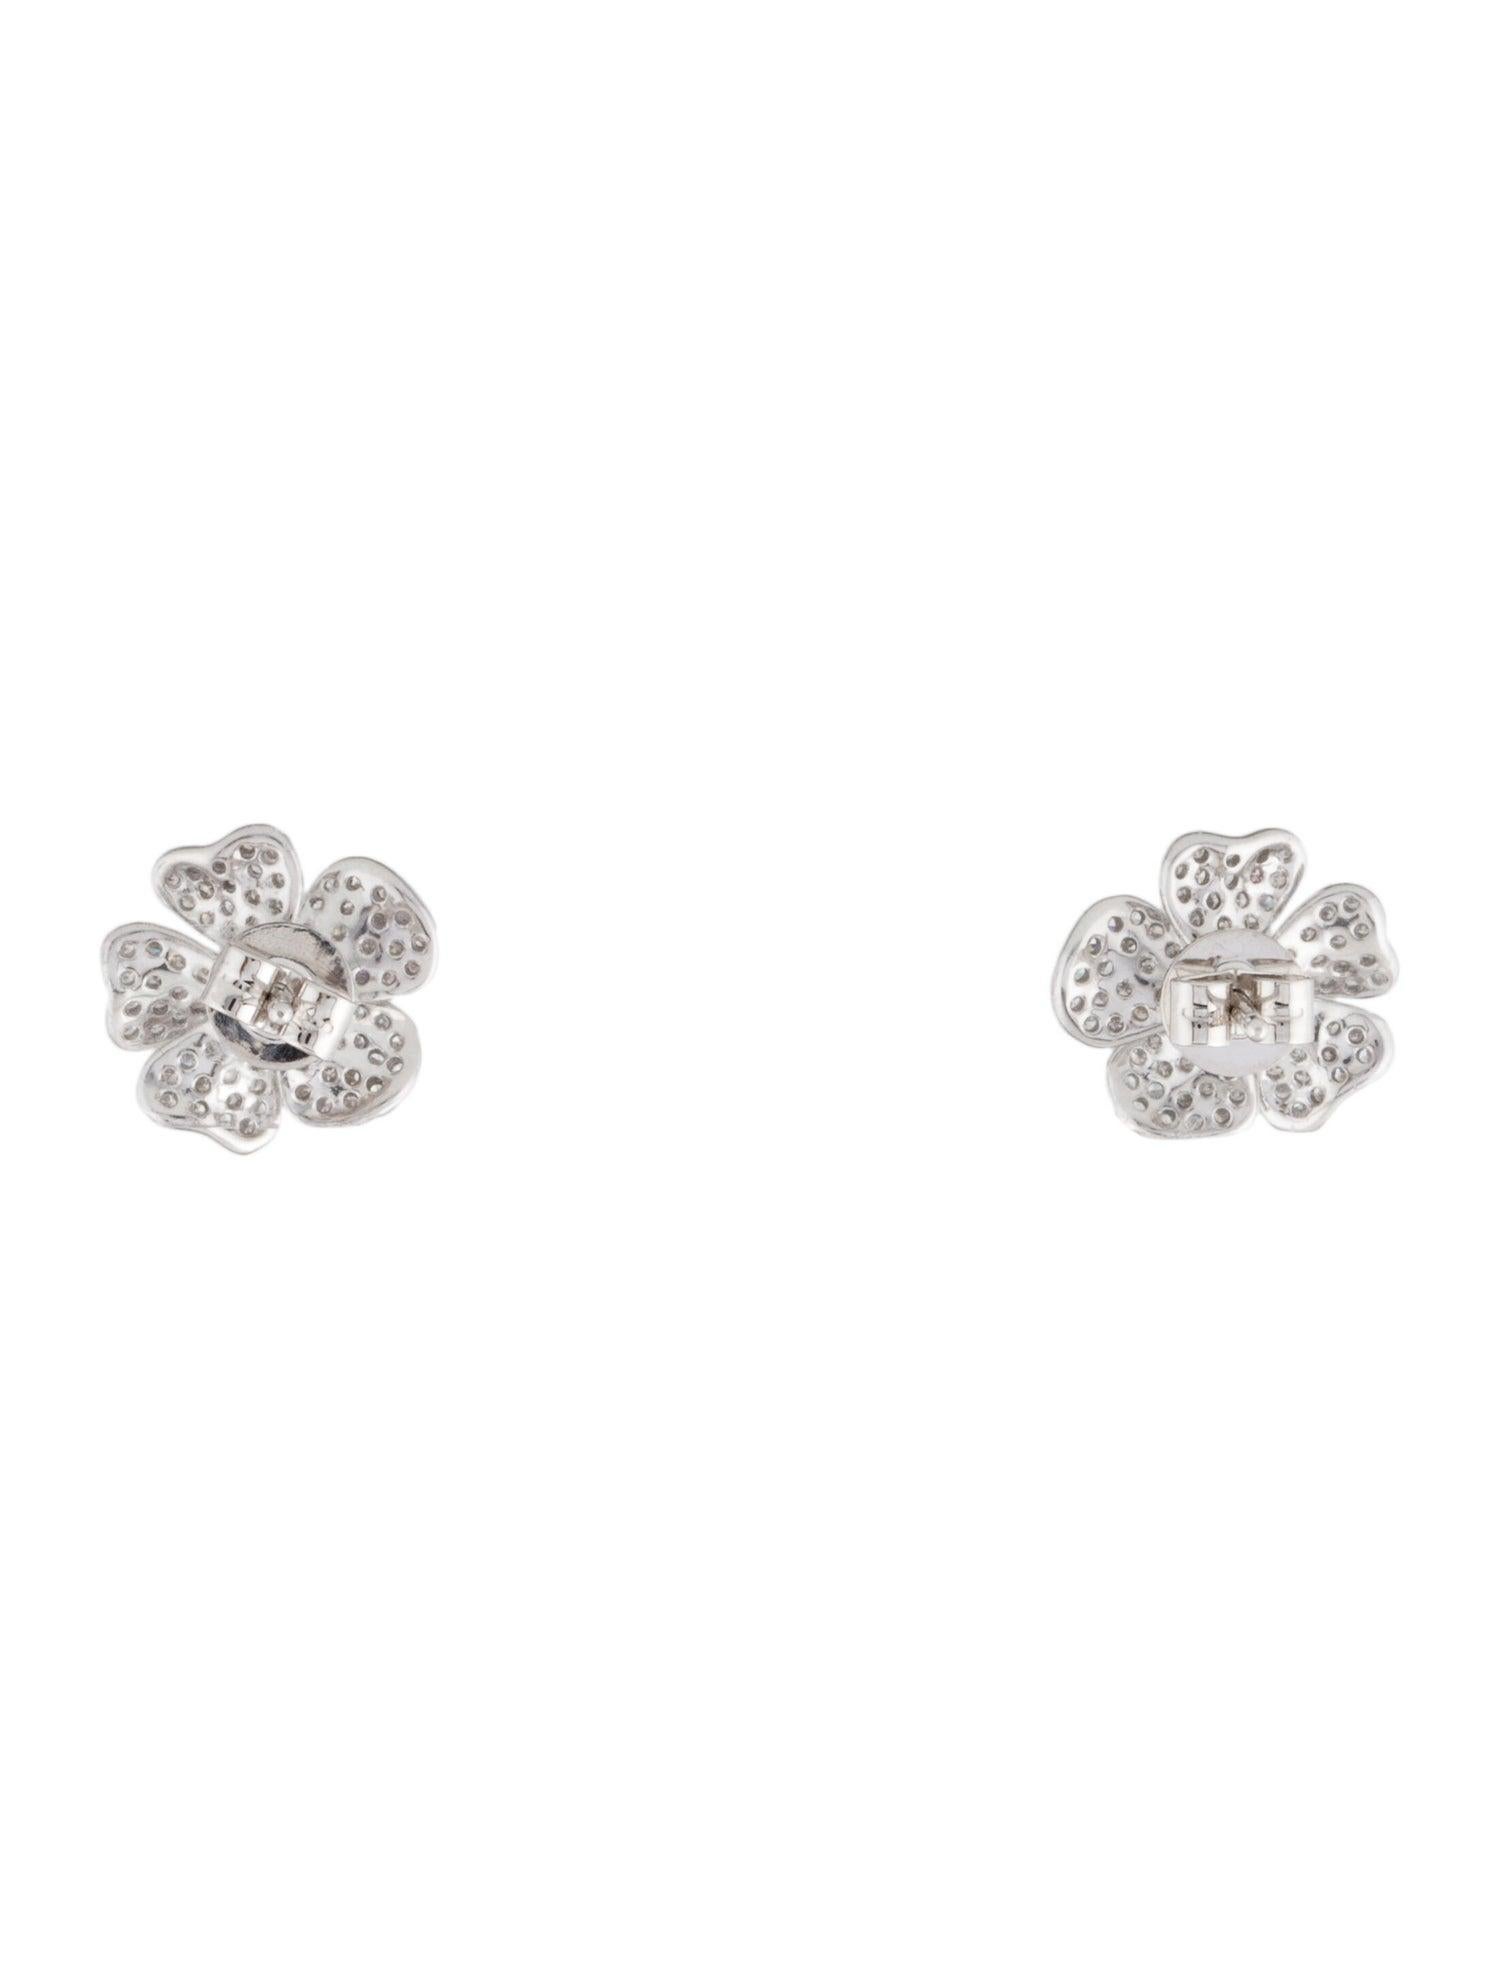 Wonderfully lovely and artfully unique, this set of flower earrings is sure to brighten and cheer your day. Delicate petals drenched in diamonds bring a touch of dazzle to your look. White 14 karat gold makes for a lasting and decadent addition to